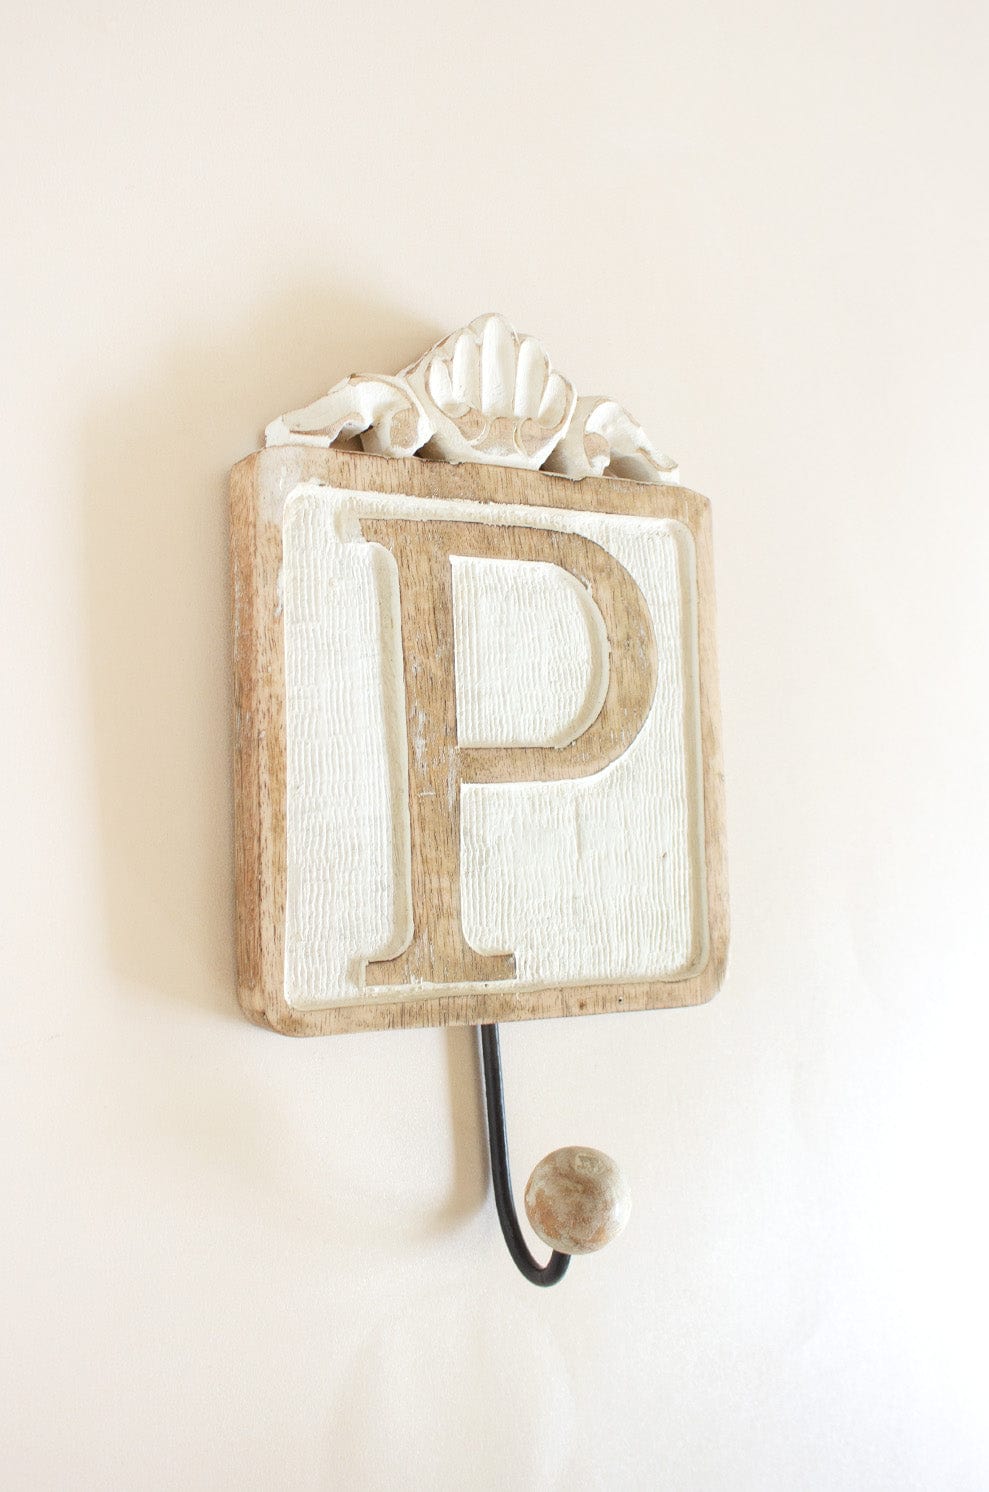 Letter Wall Hook / PABOUT: We found a great way to personalize wall hooks by giving each of them a single alphabet to have and hold. Now spell out your name, or B.E.D for a bedroom, L.OLetter Wall Hook /